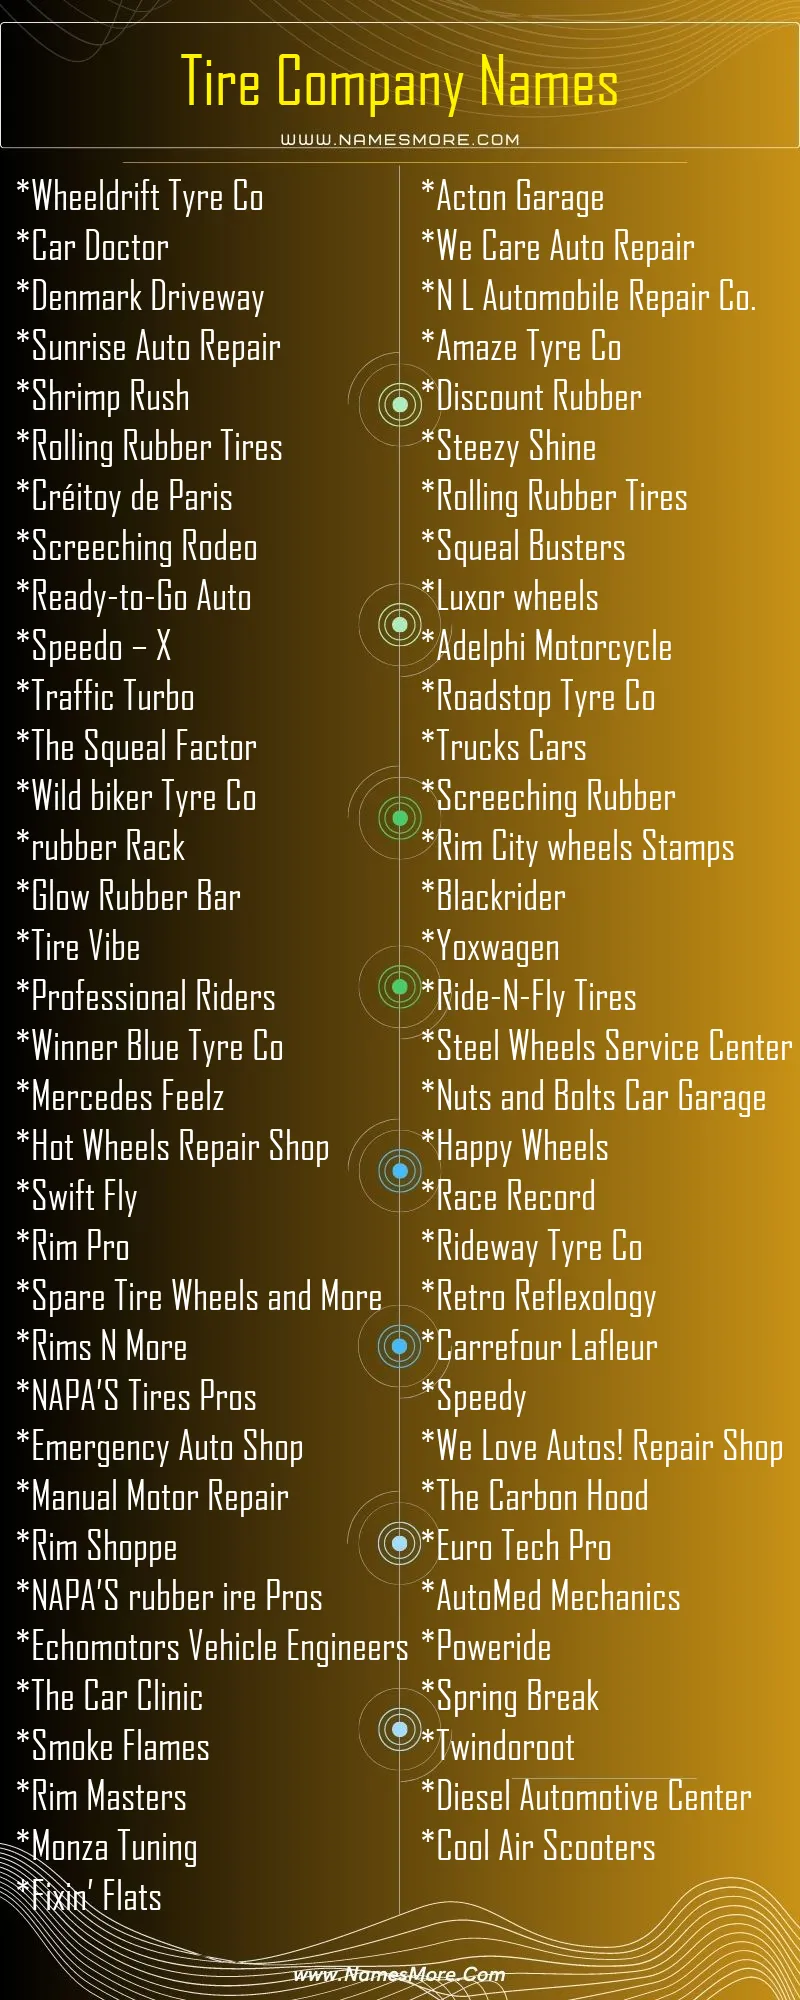 Tire Company Names List Infographic